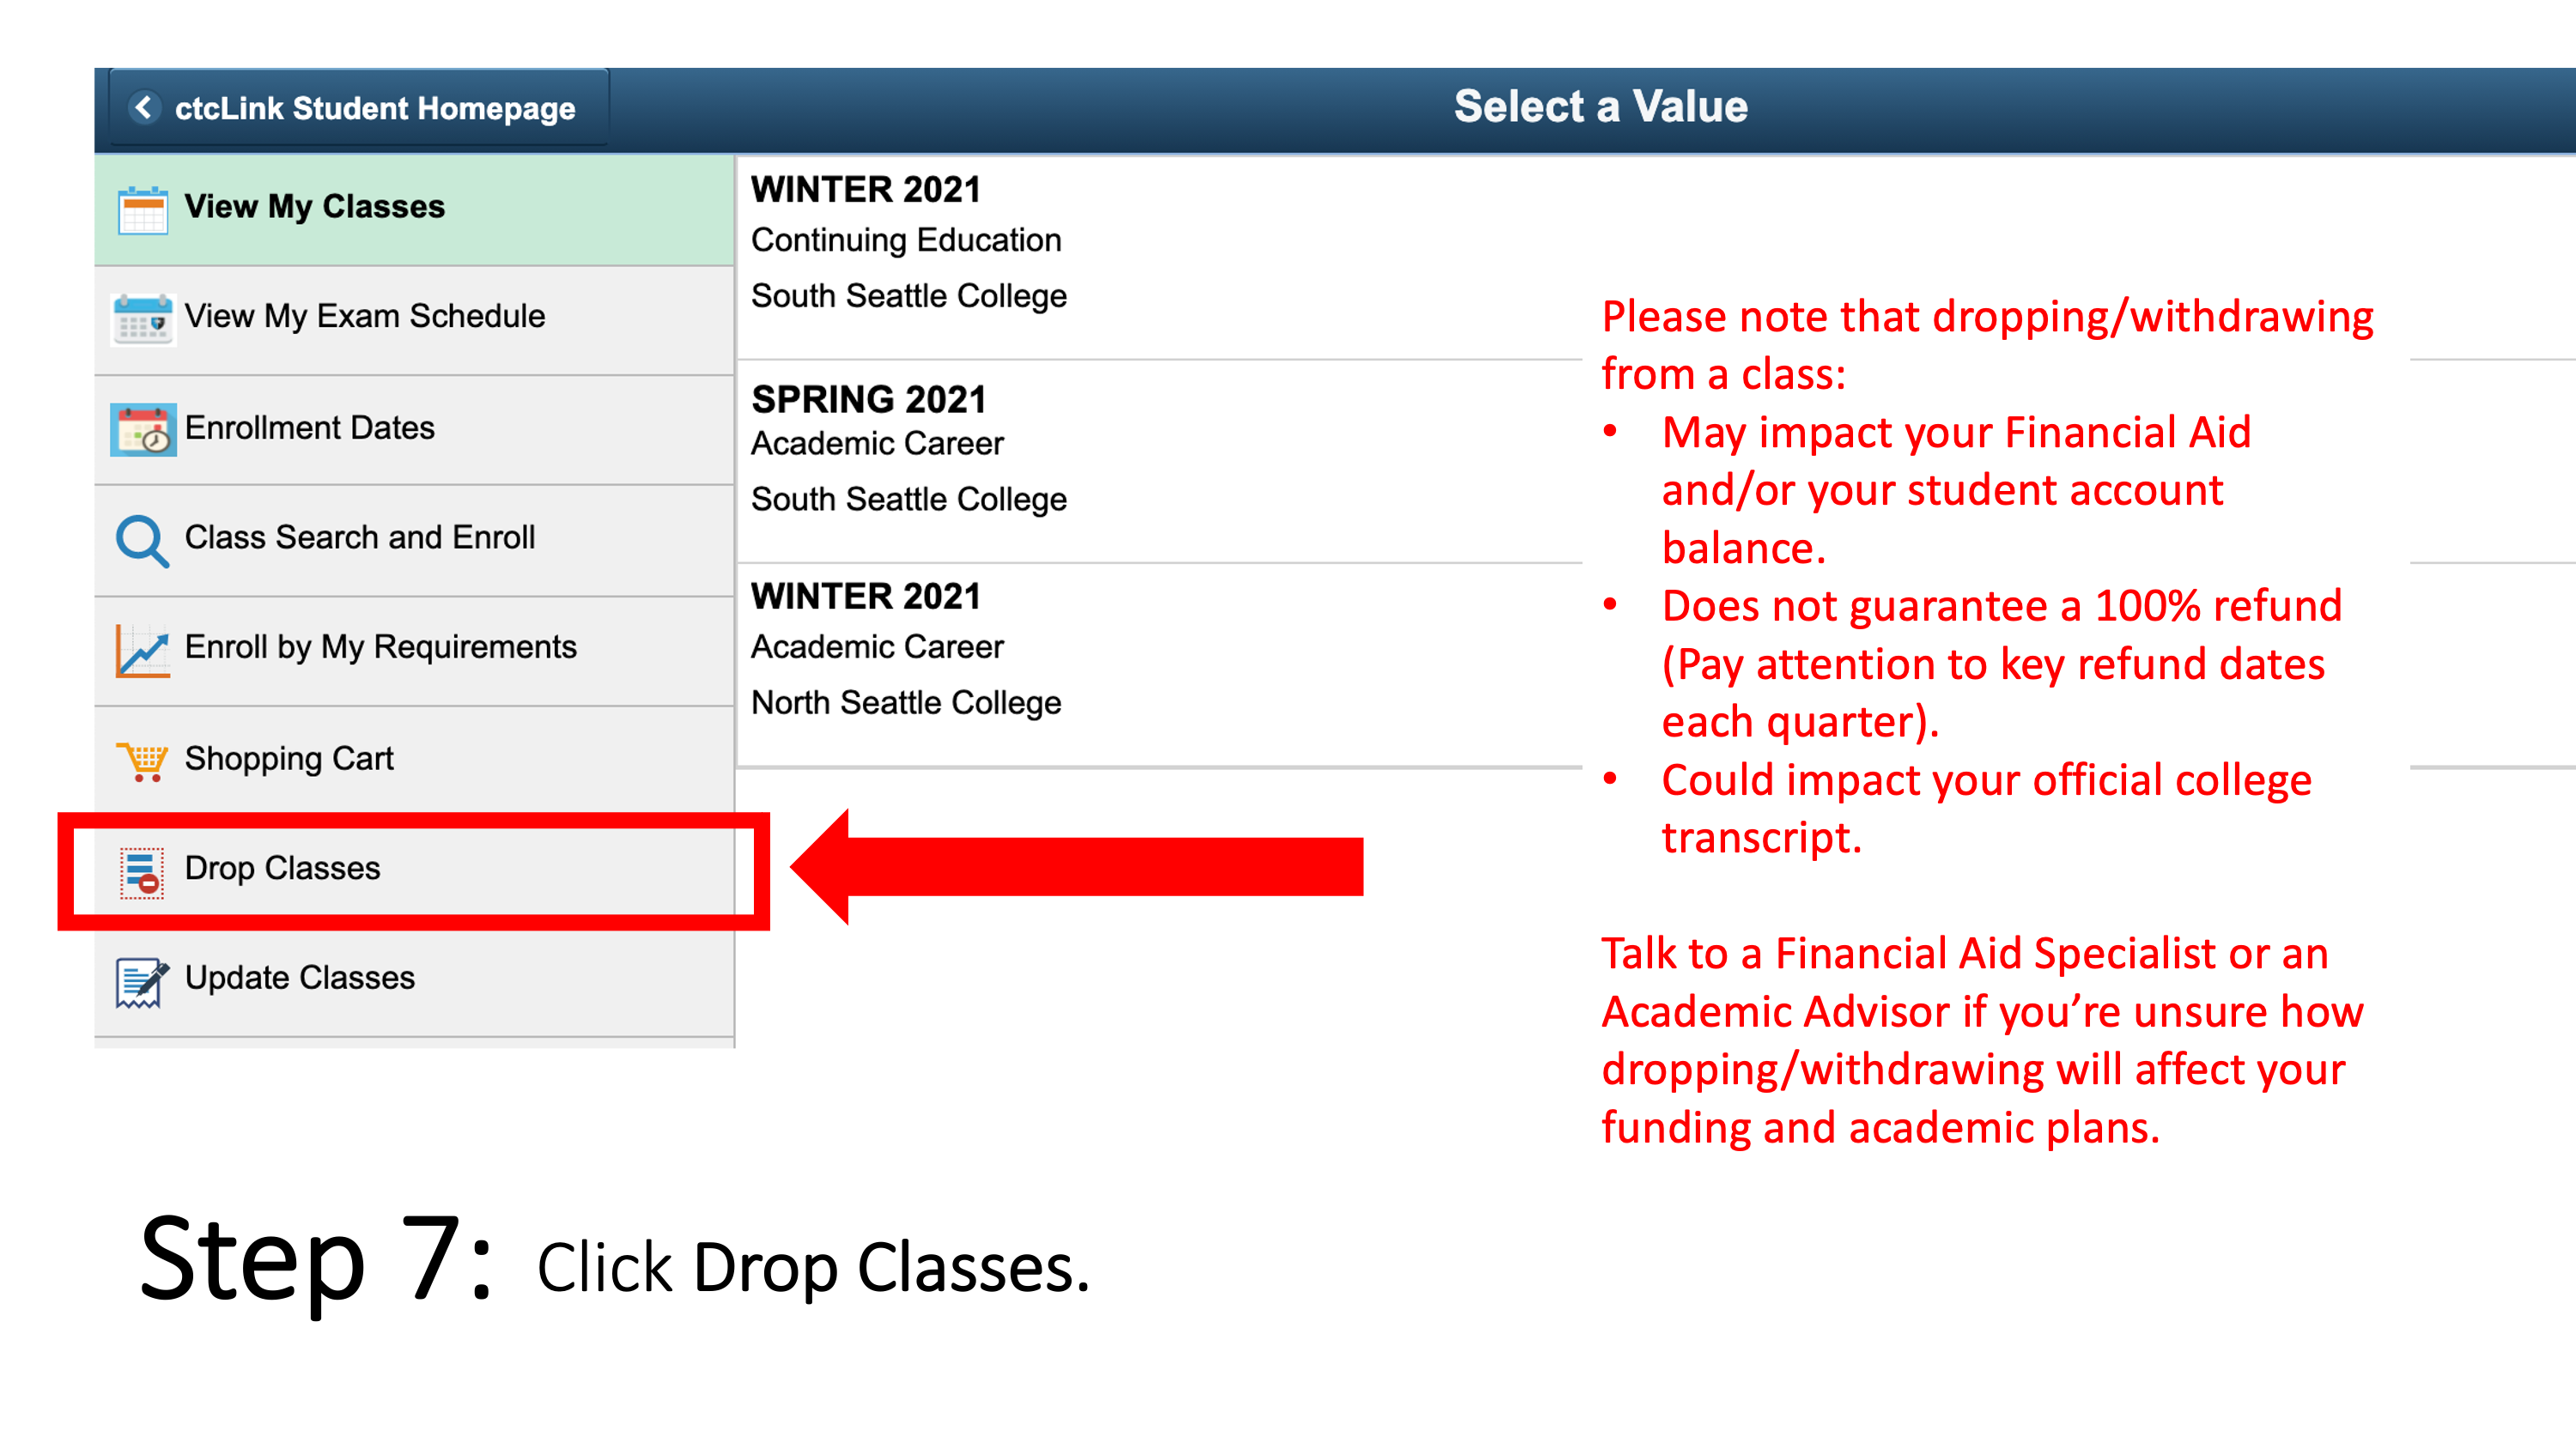 Click Drop Classes. Please note that dropping/withdrawing from a class: may impact your Financial Aid and/or your student account balance; does not guarantee a 100% refund (Pay attention to key refund dates each quarter); could impact your official college transcript. Talk to a Financial Aid Specialist or an Academic Advisor if you’re unsure how dropping/withdrawing will affect your funding and academic plans.